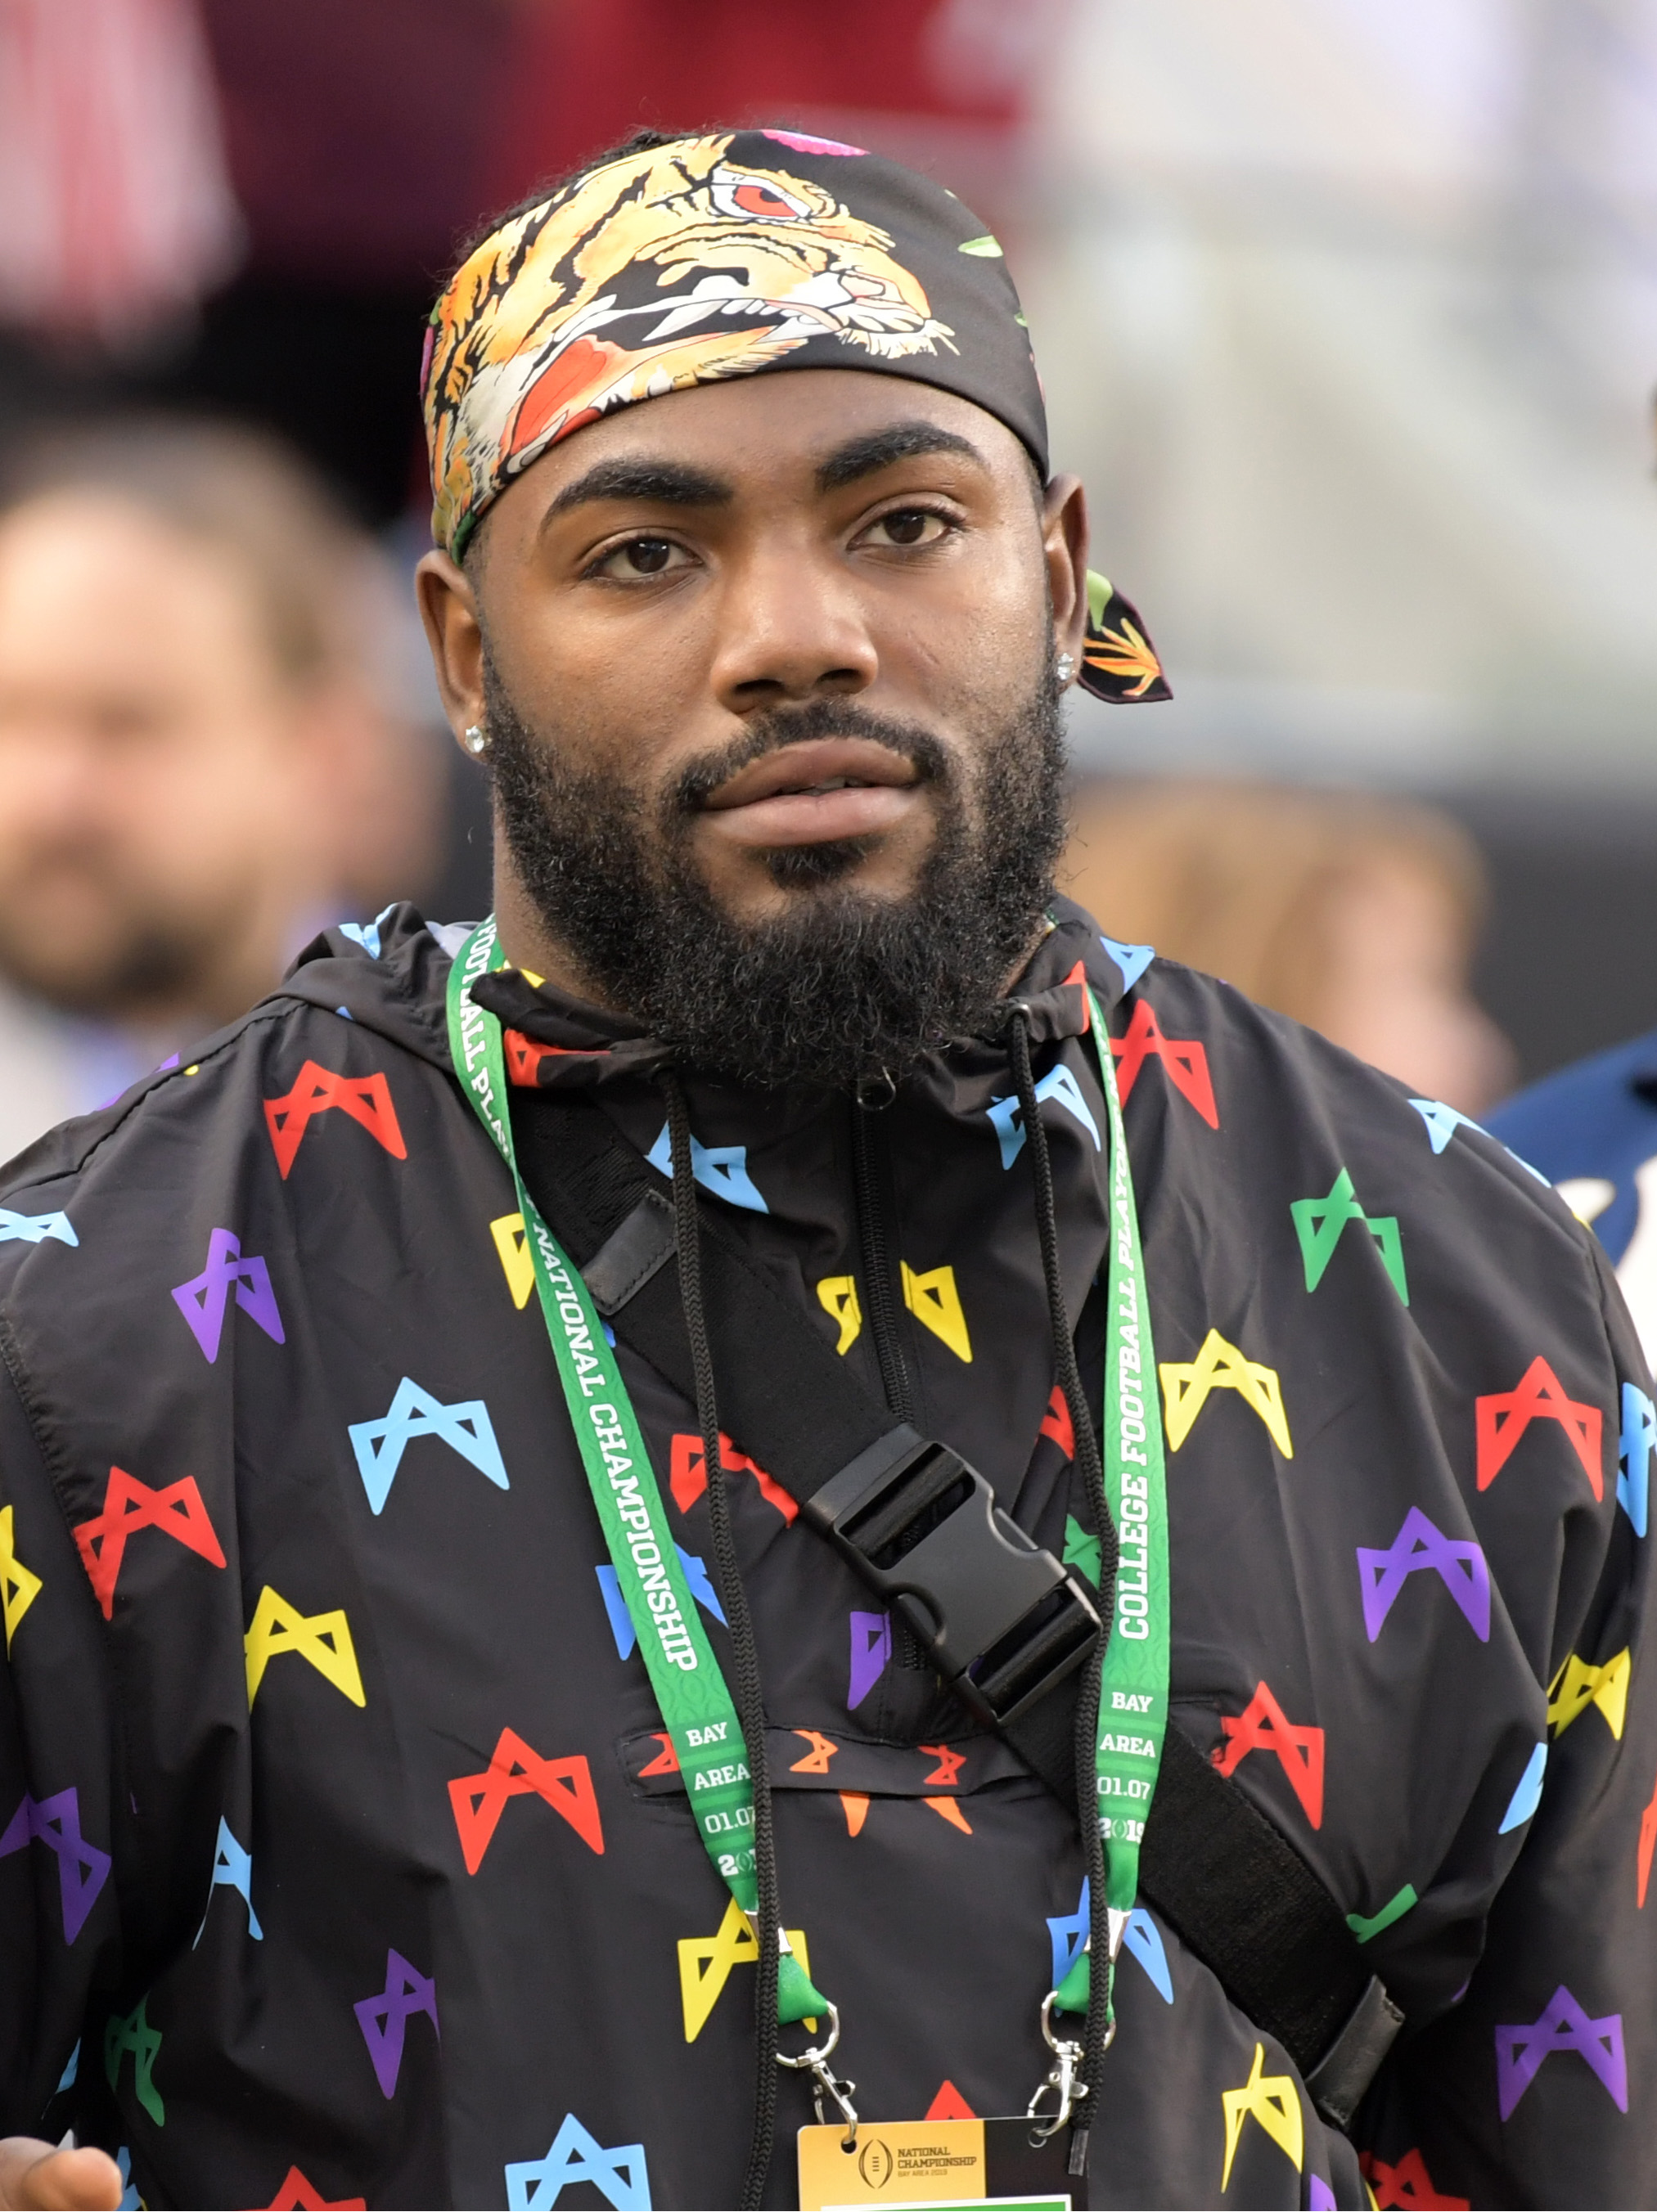 Landon Collins signing with Giants in reunion